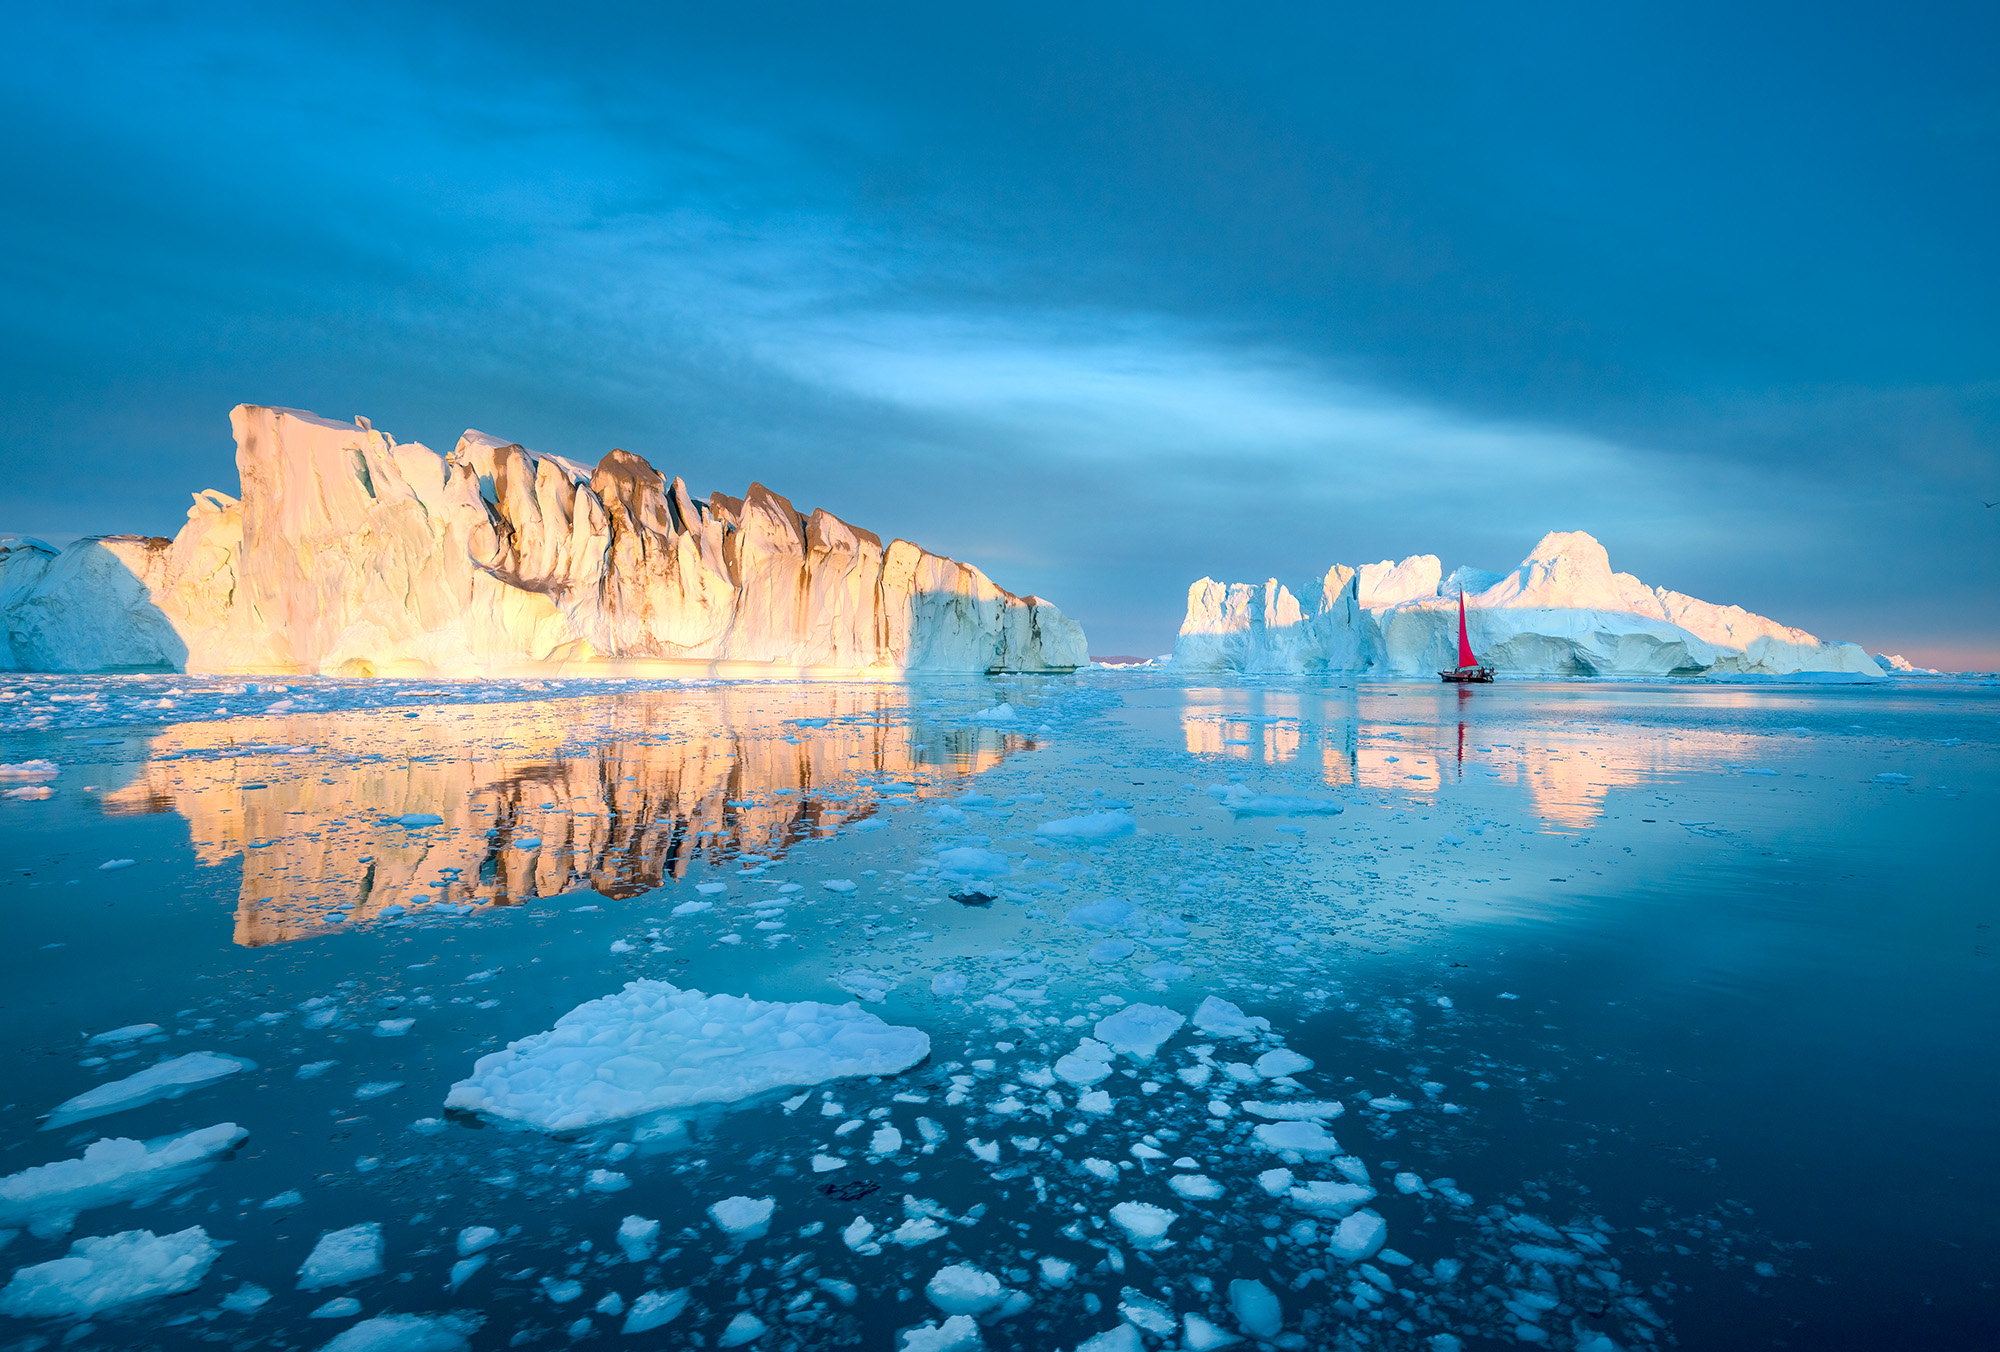 Set in Disko Bay near Ilulissat, Greenland, this image captures the captivating allure of the Arctic landscape. In the distance...